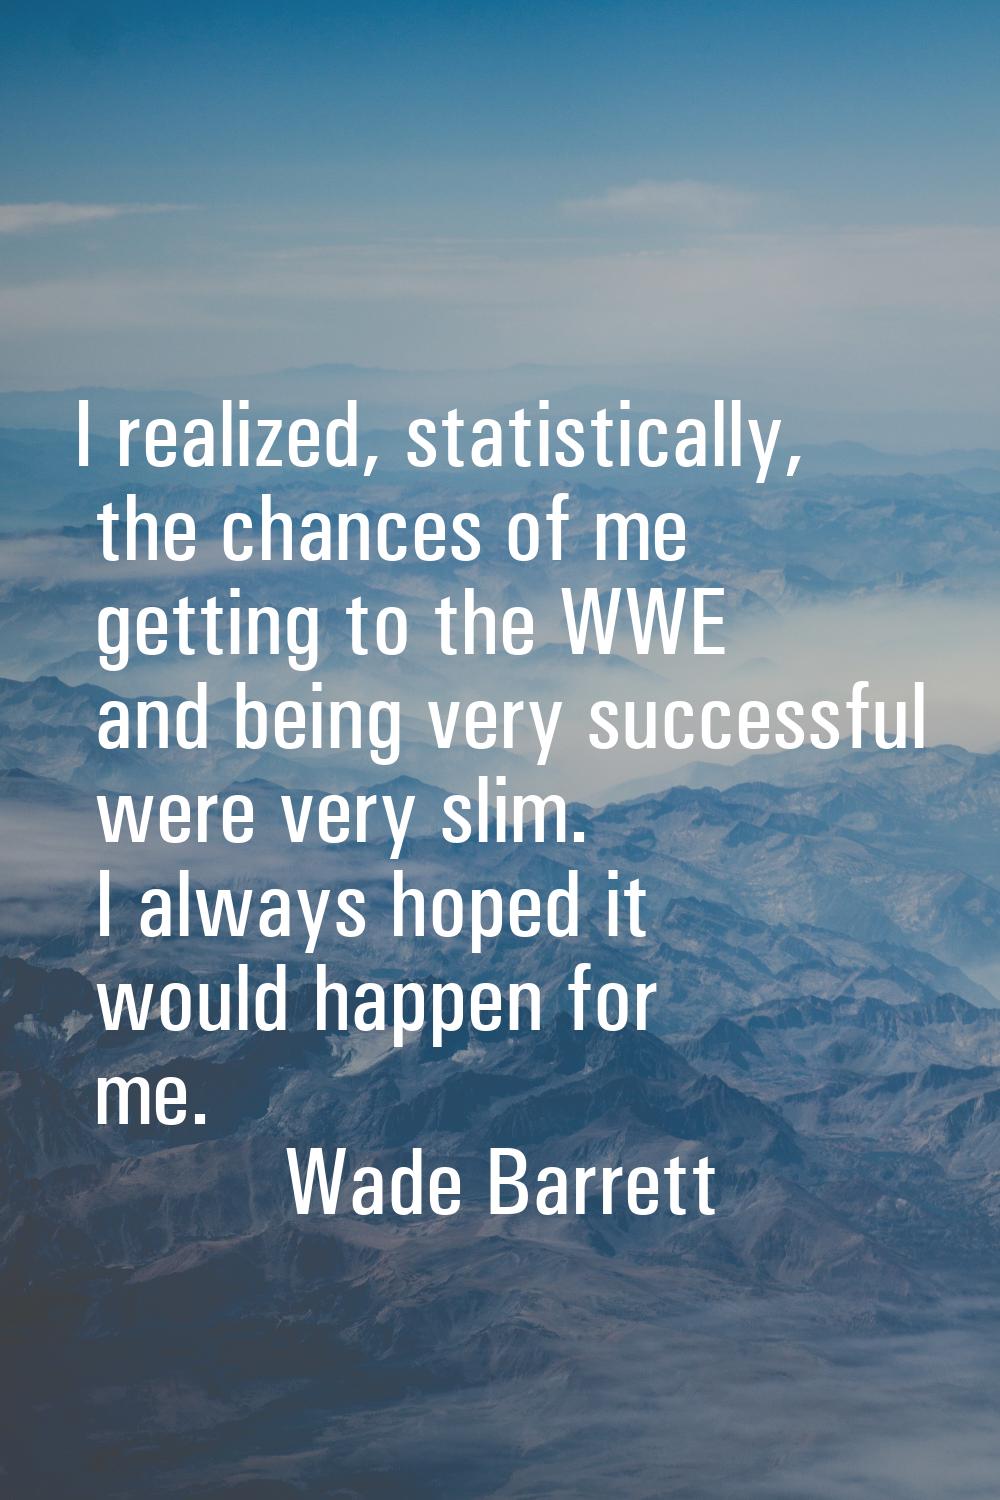 I realized, statistically, the chances of me getting to the WWE and being very successful were very